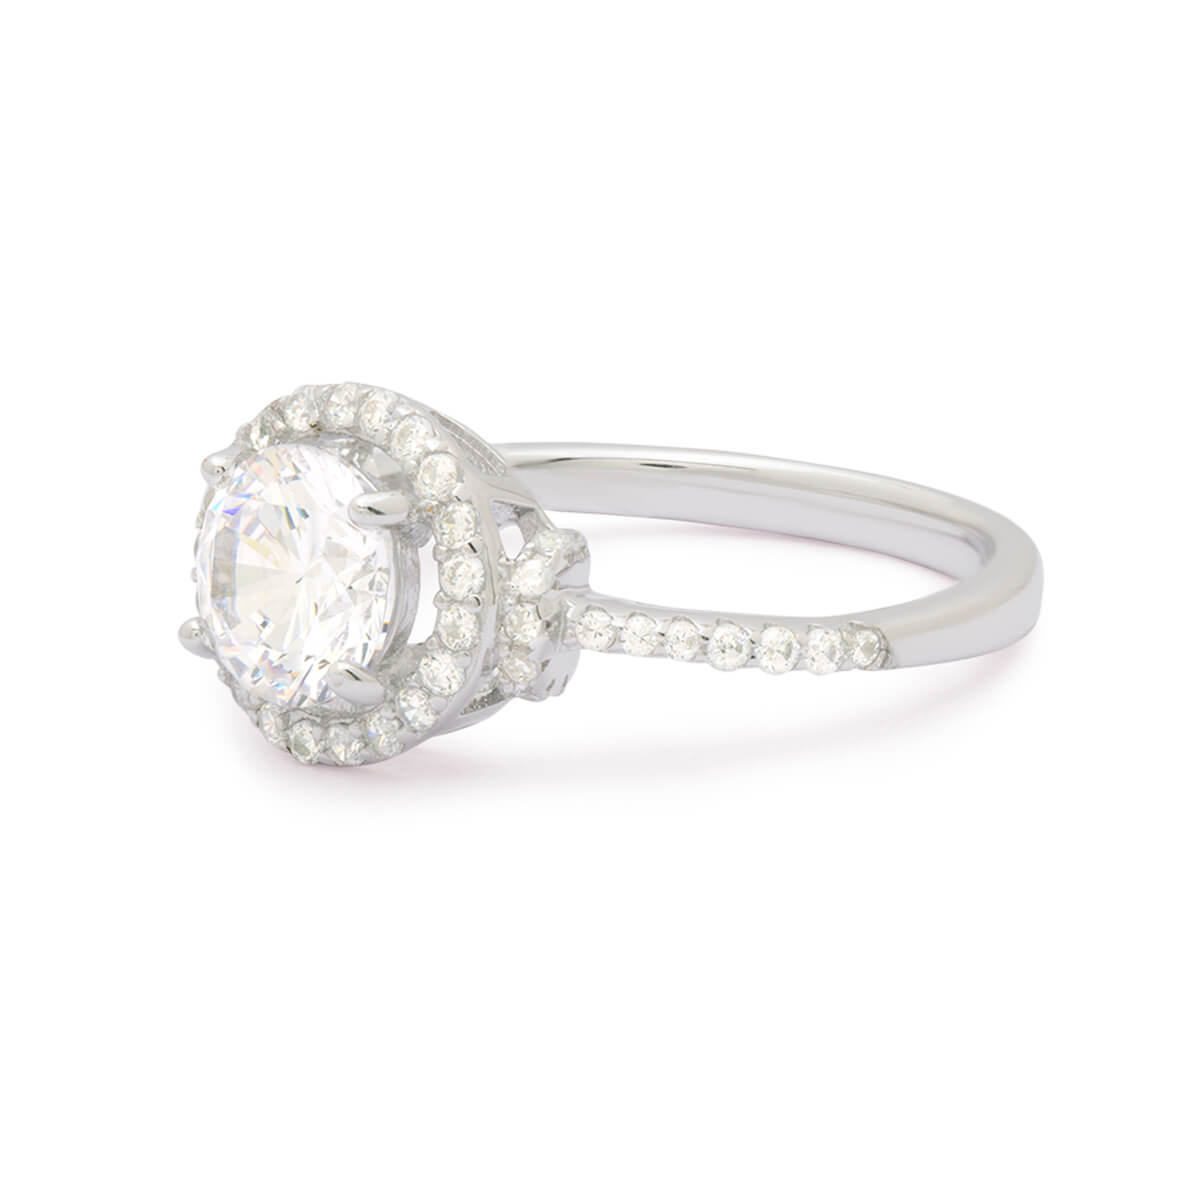 Lustrous Solitaire Silver Ring